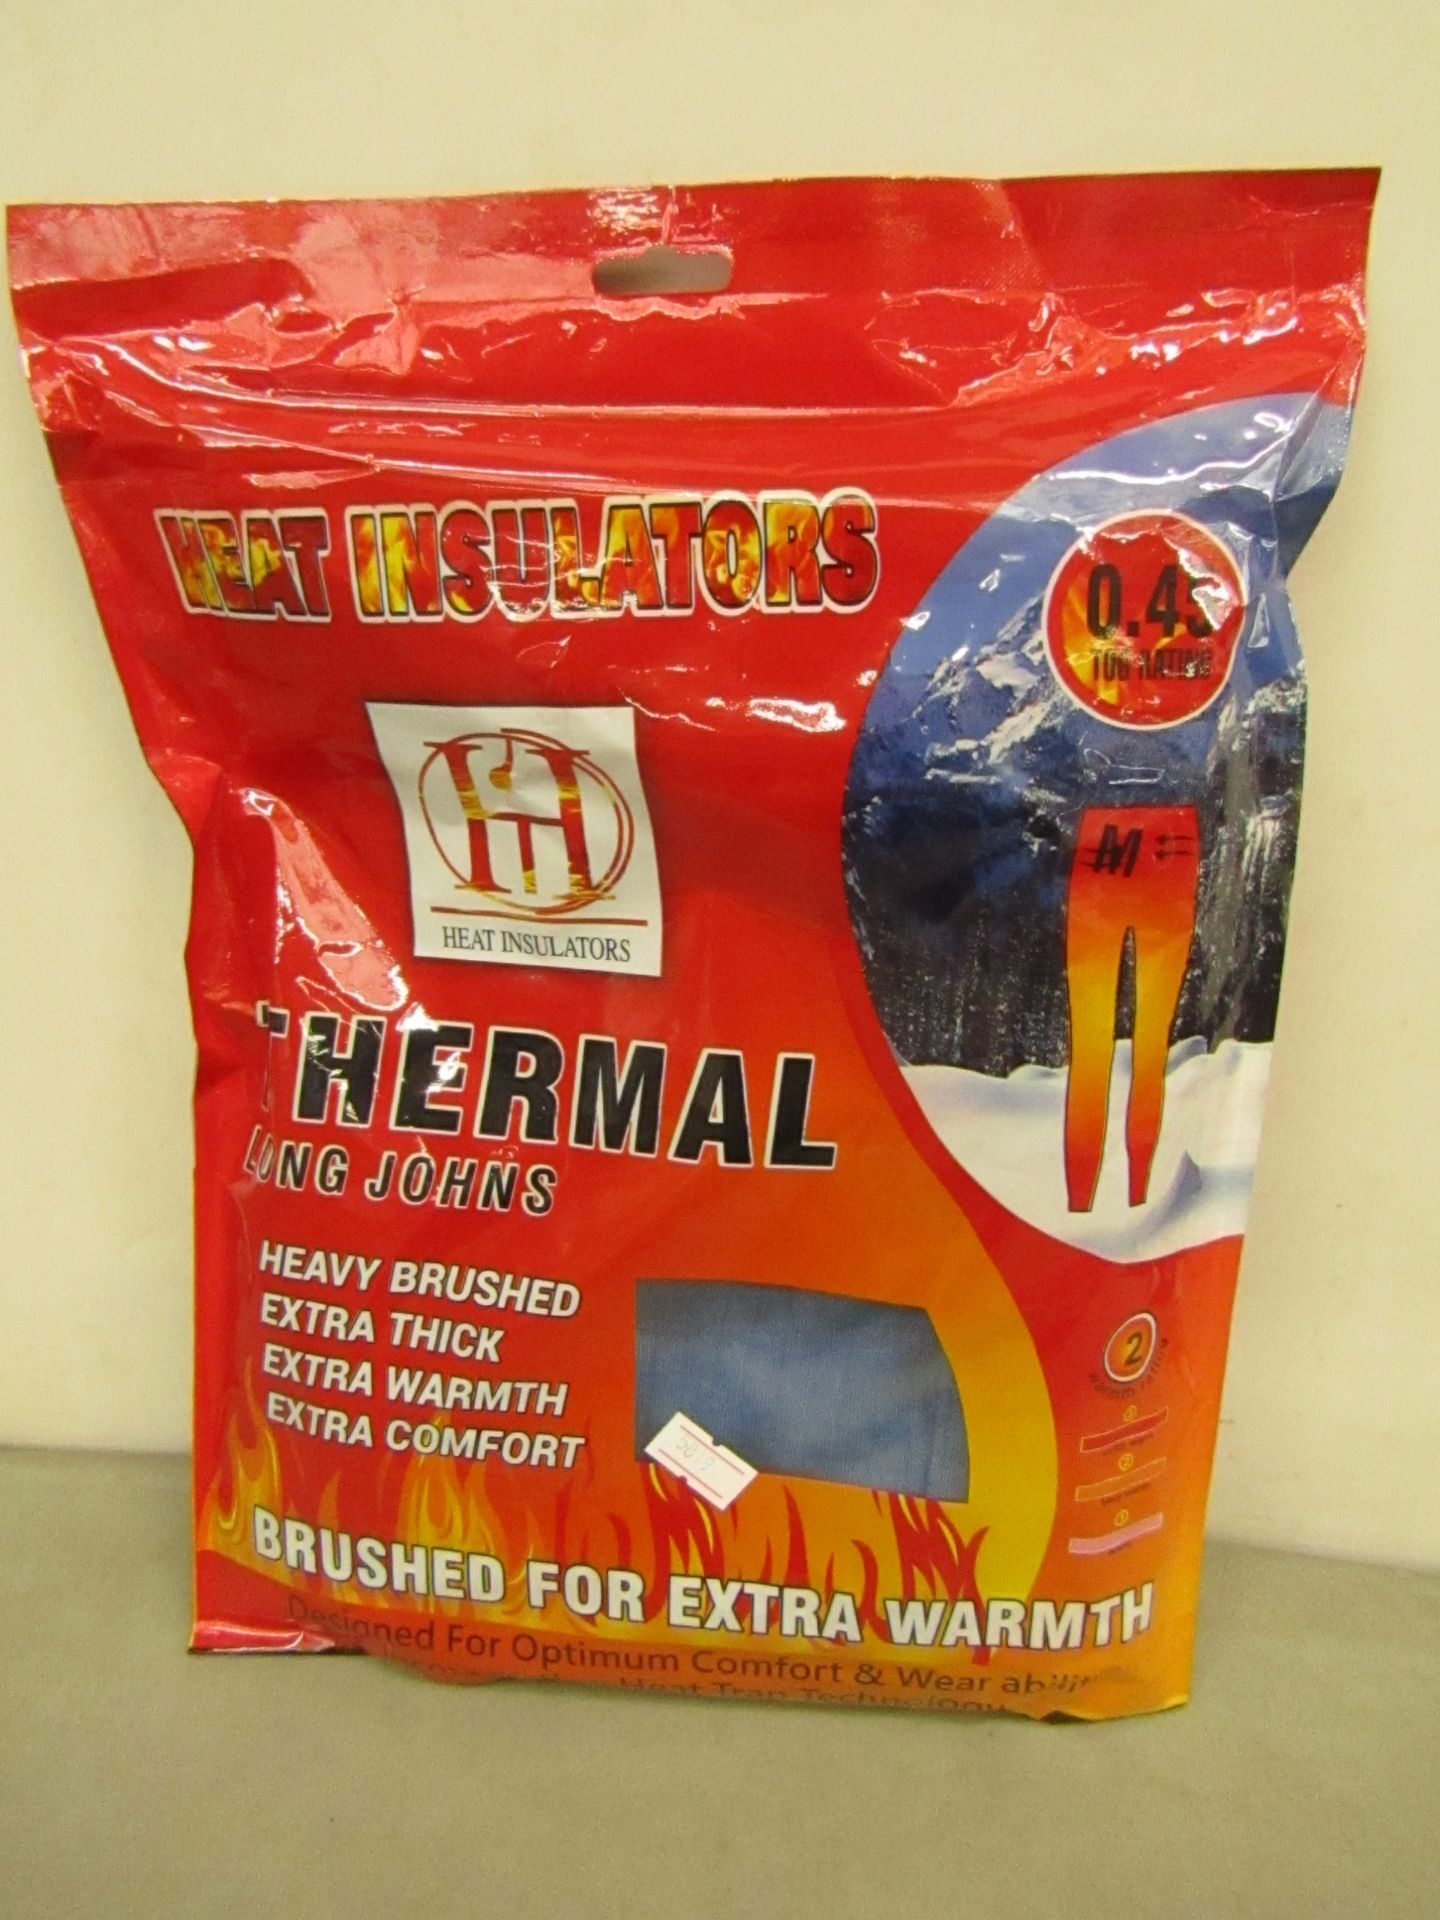 2 x Heat Insulators Thermal Long Johns 0.45 tog sizes M new & packaged